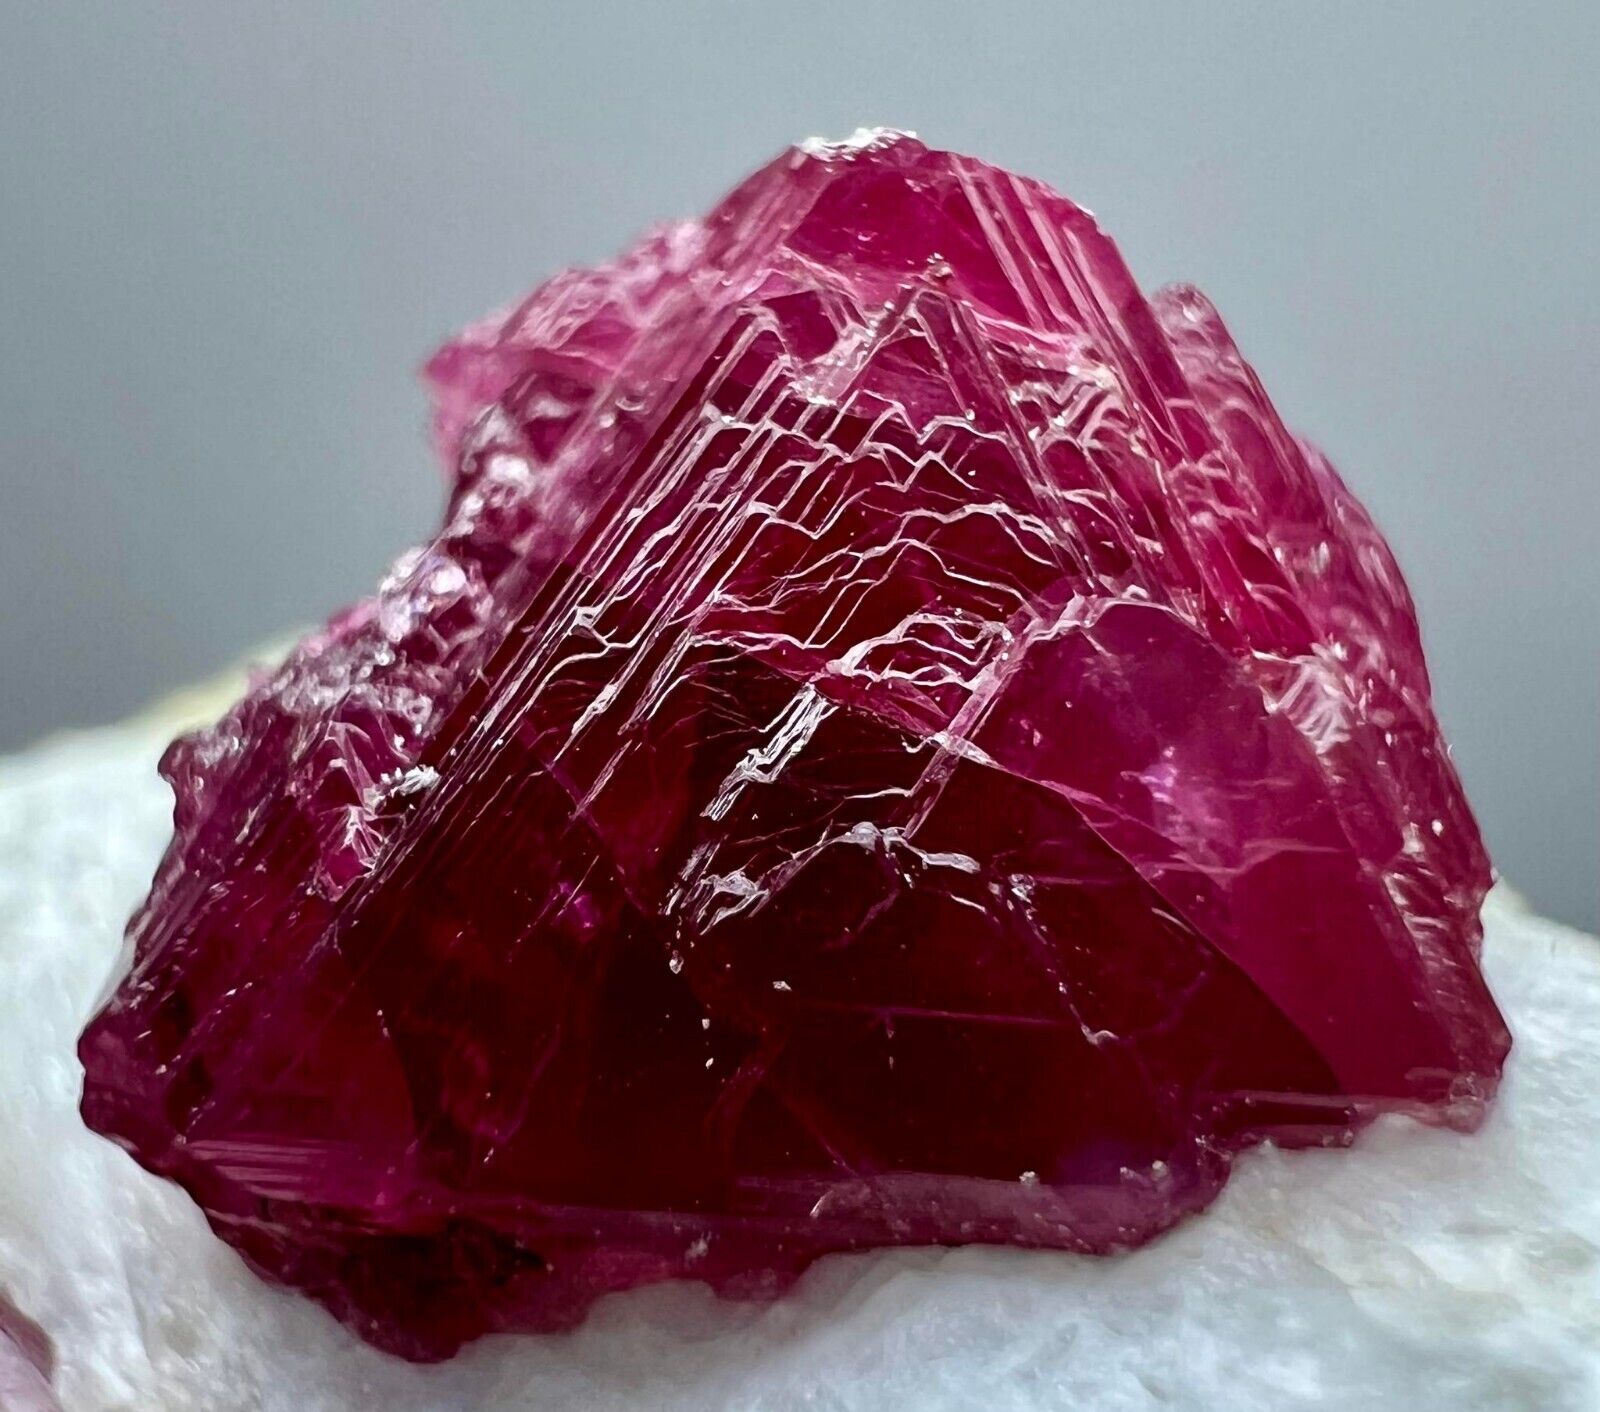 328 gr. Full&Well terminated High quality blood red Spinel crystals on matrix.